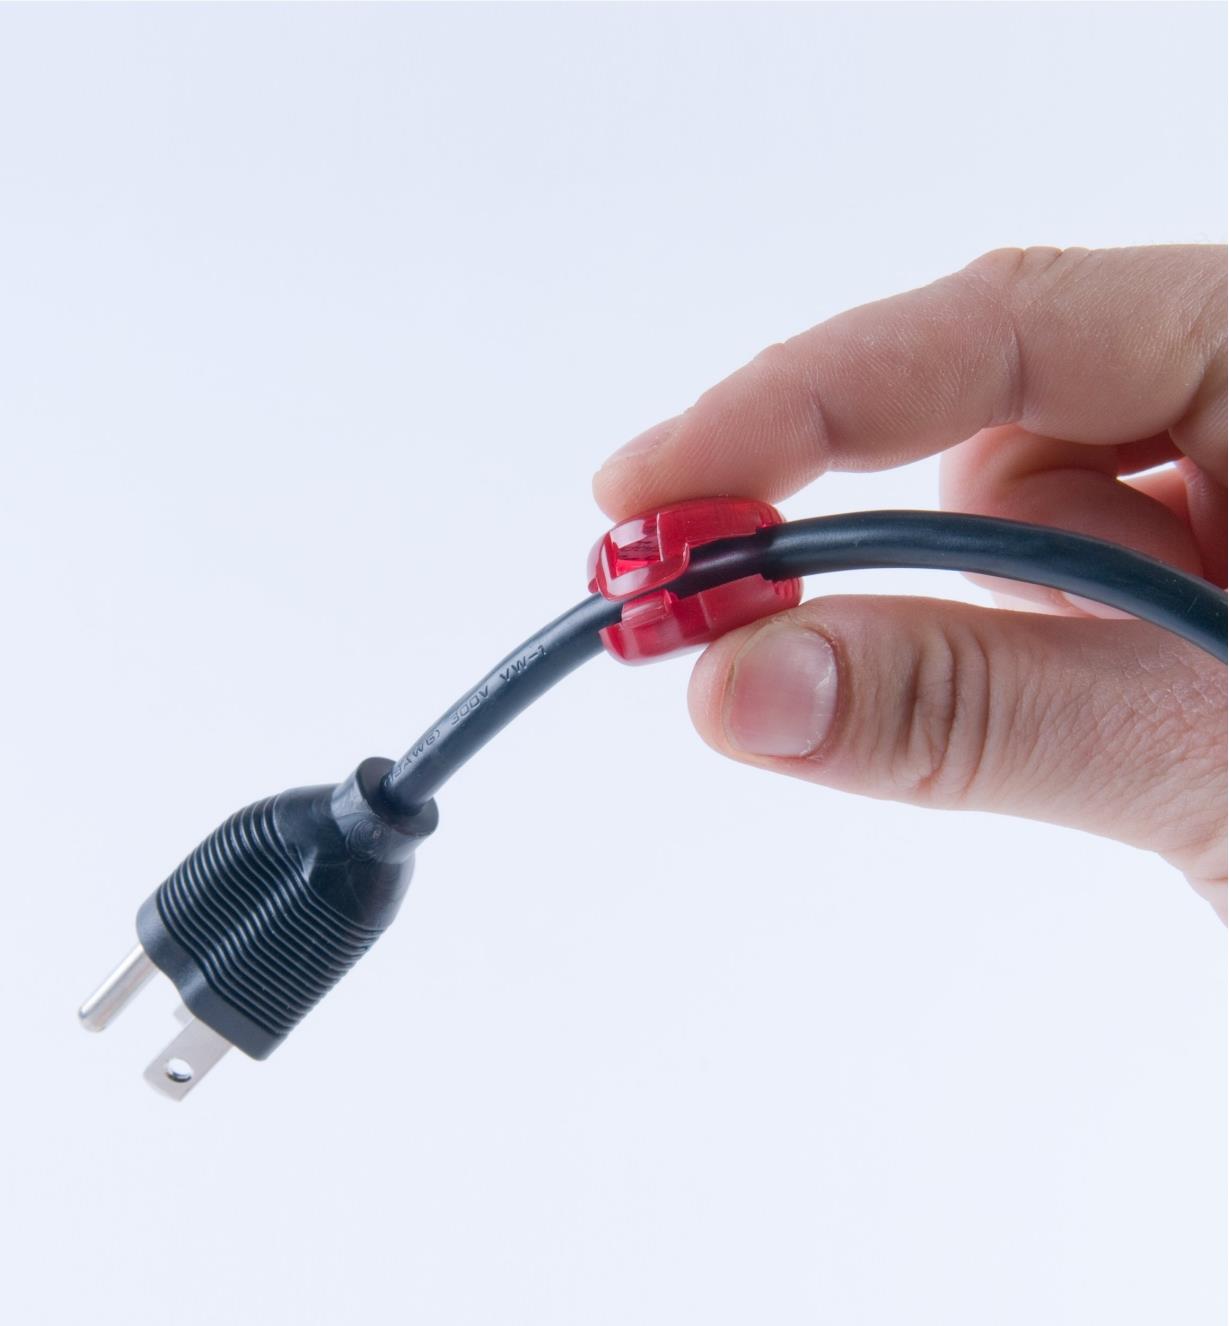 Small cord identifier clipped near the plug end of a power cord